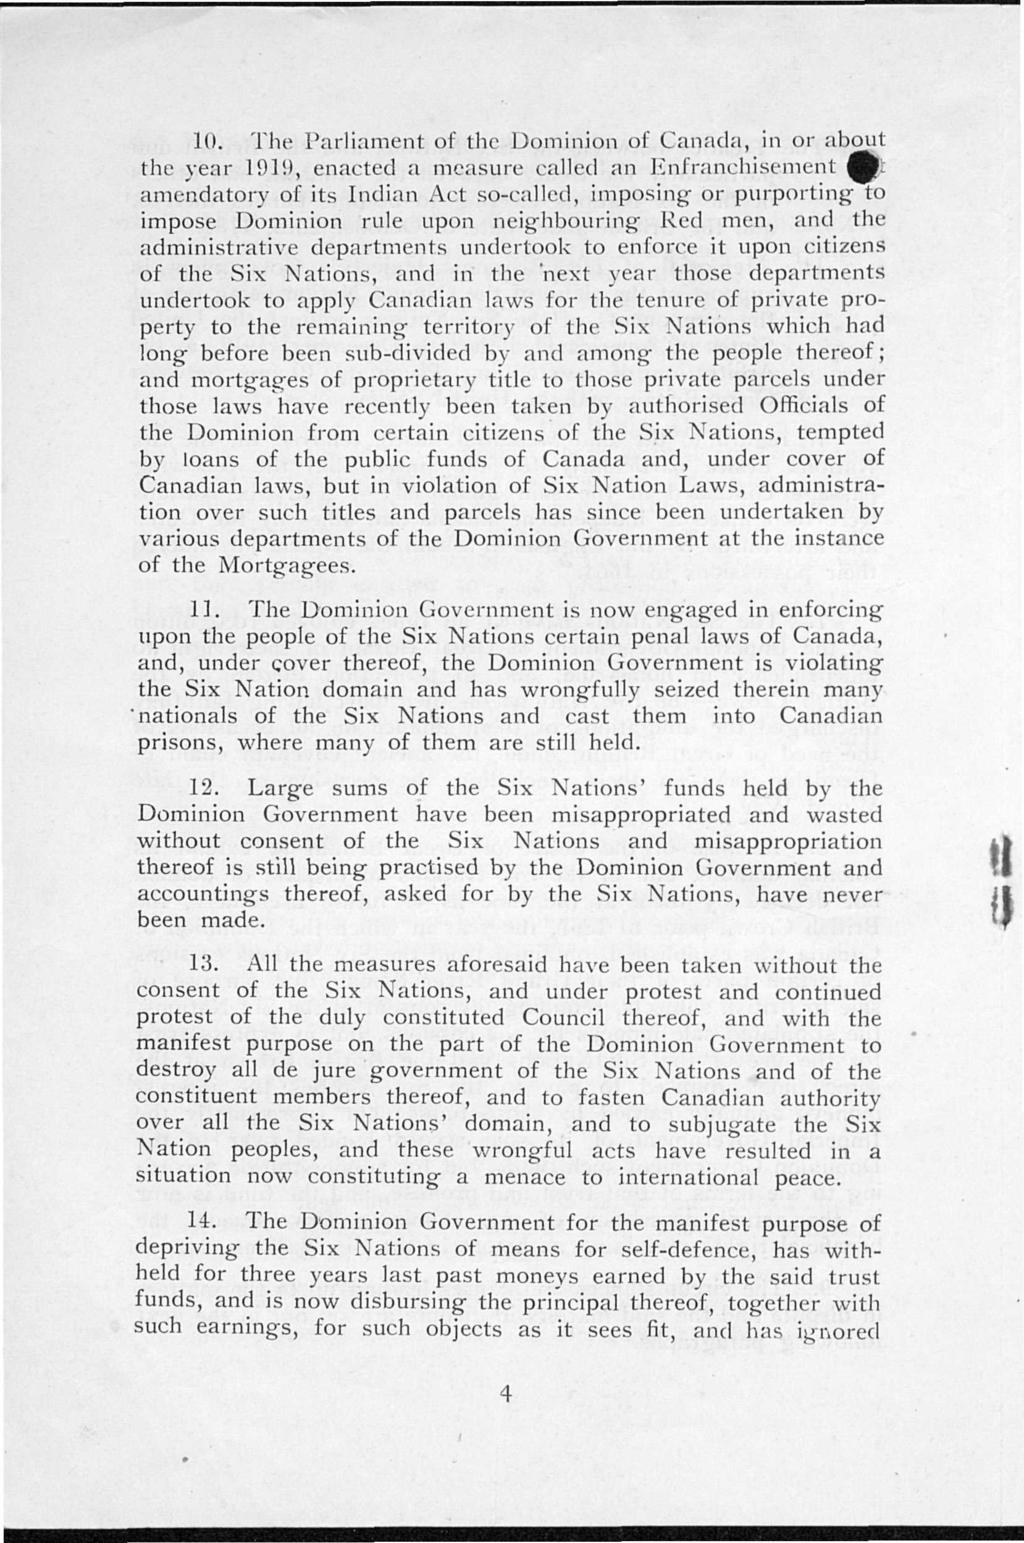 10. The Parliament of the Dominion of Canada, in or about the yeai 1919, enacted a measure called an Enfranchisement flf amendatory of its Indian Act so-called, imposing or purporting to impose